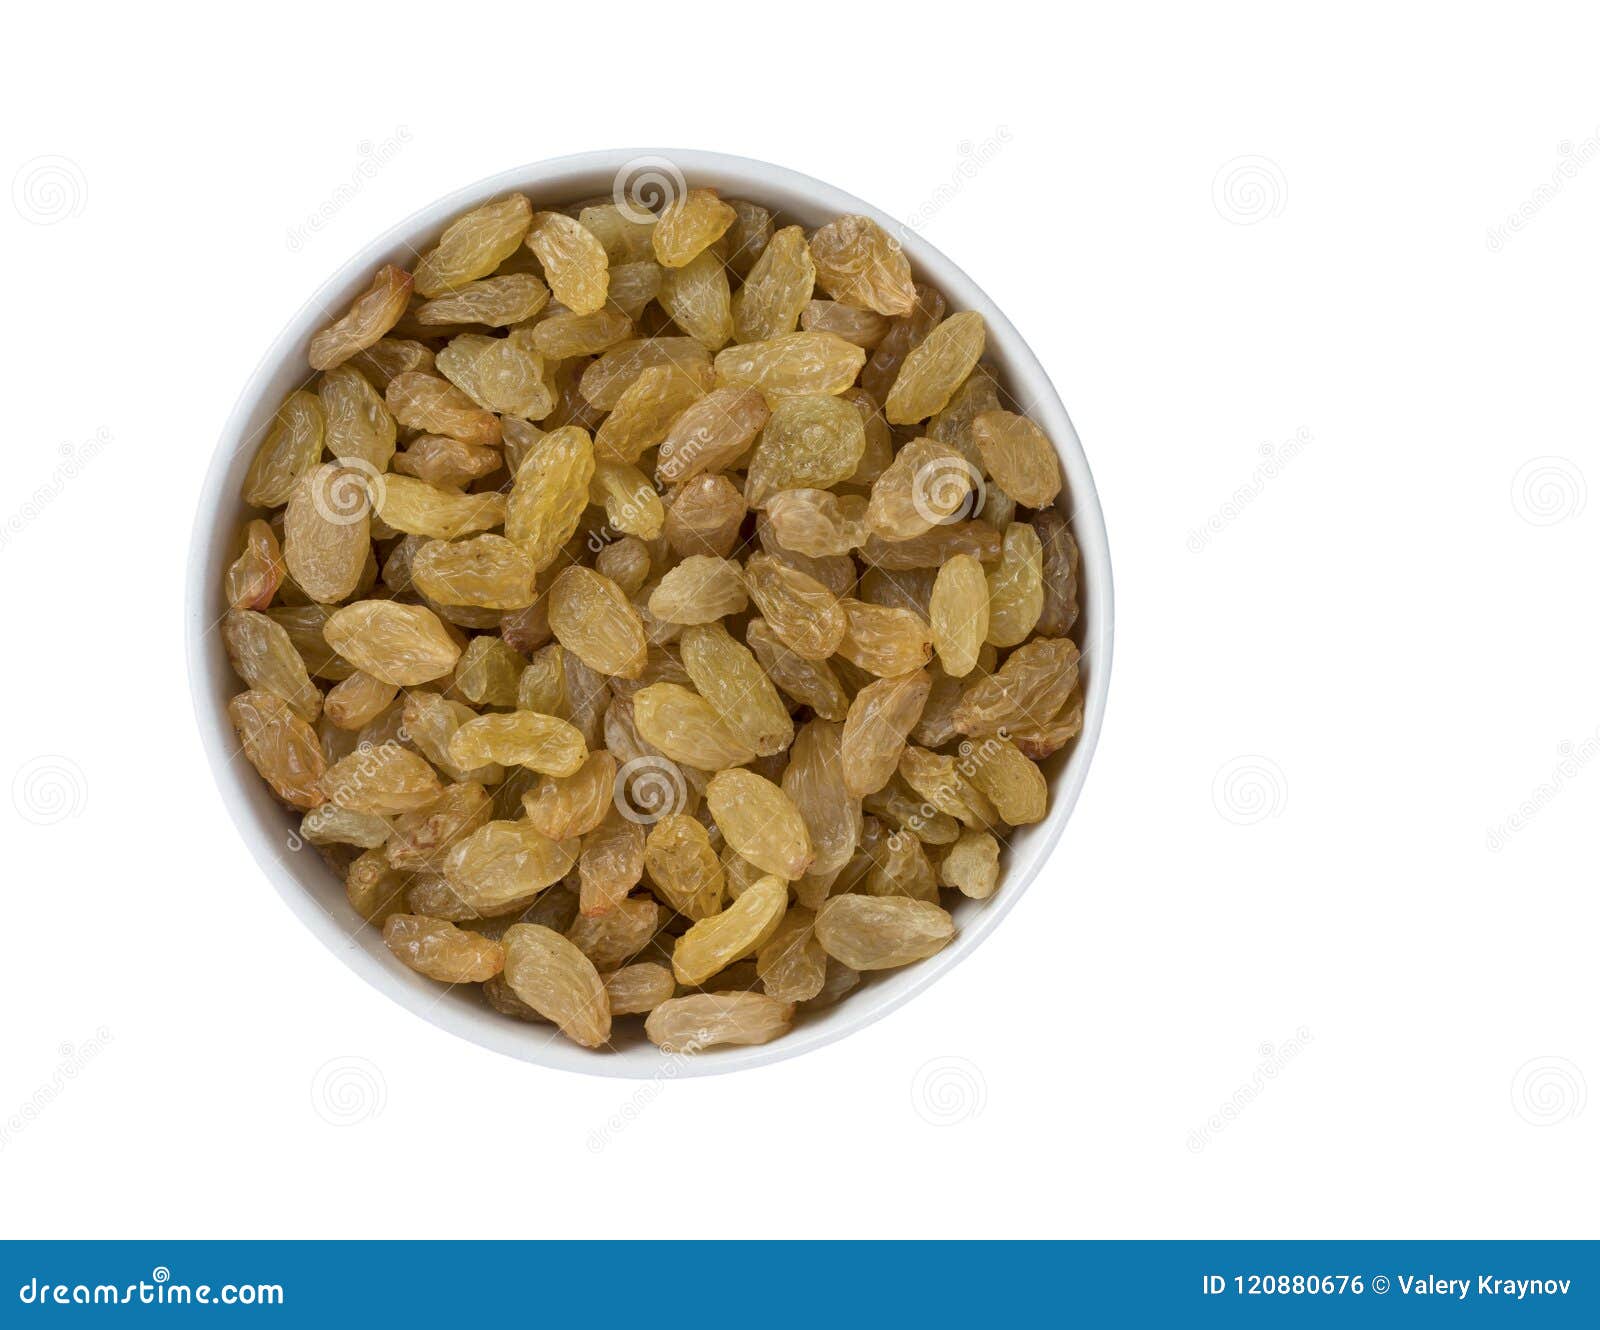 Full Bowl of Raisins on a White Background. Dried Grapes. Stock Photo ...